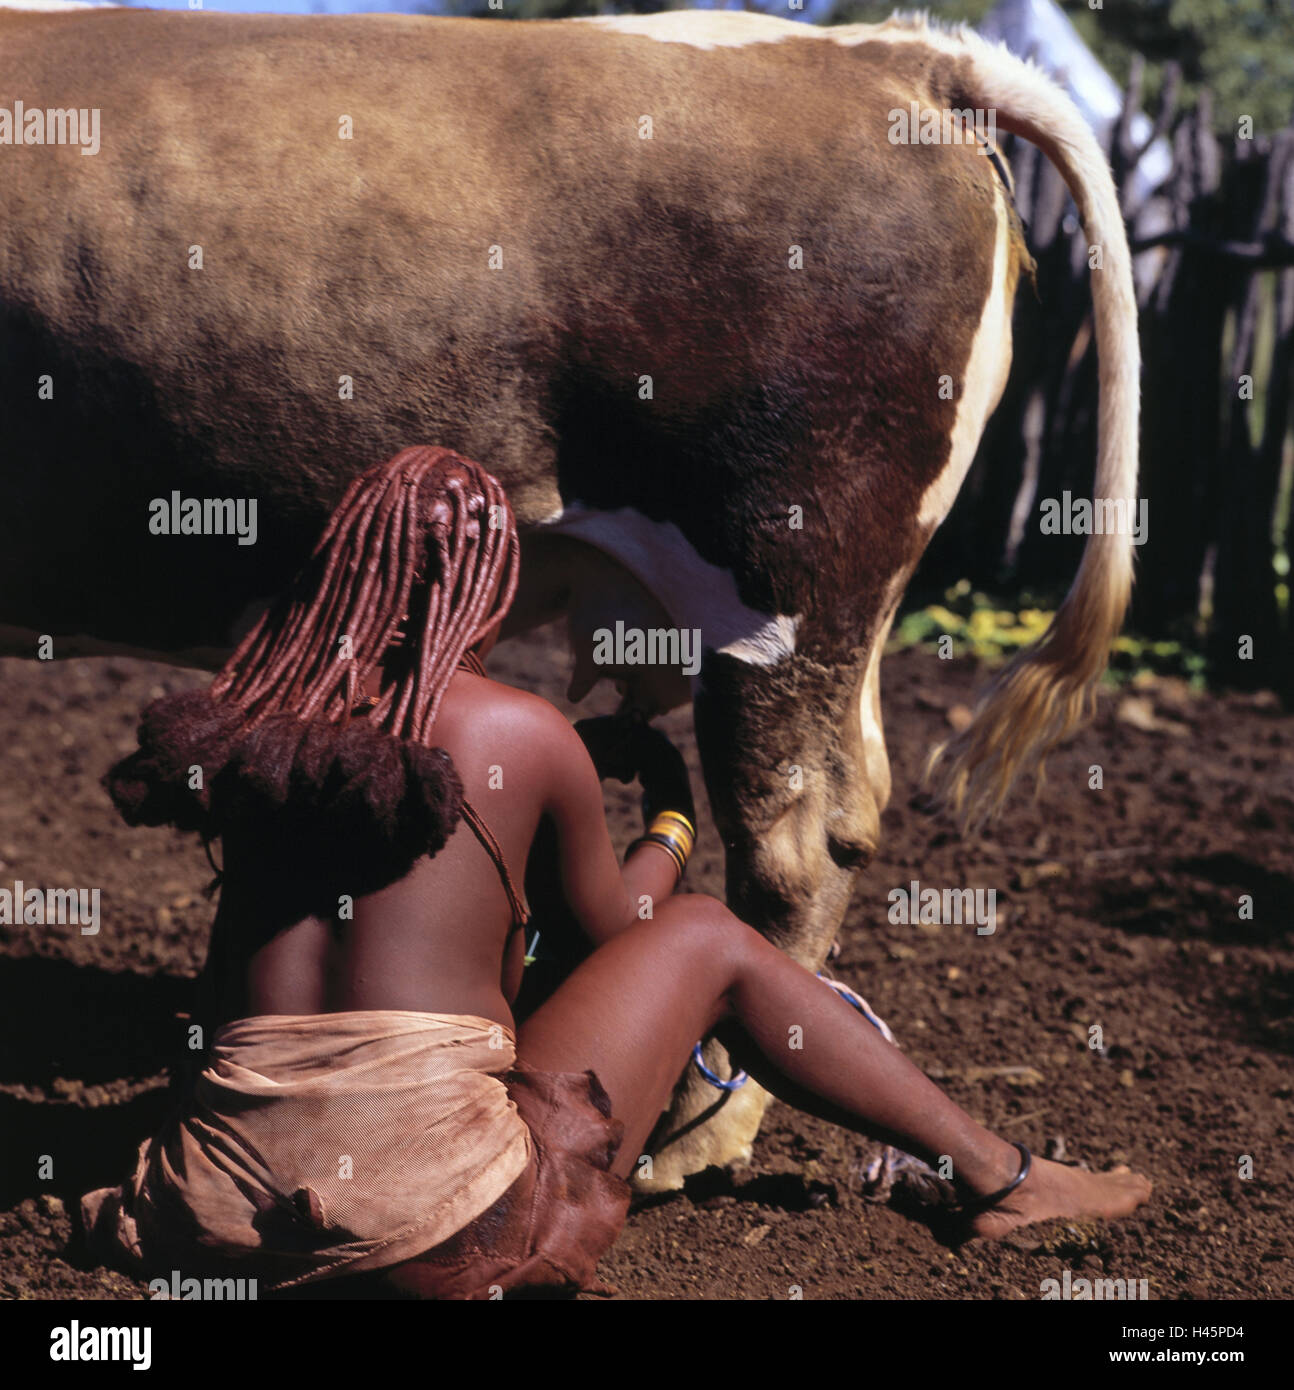 Namibia, Kamanjab, Himba woman, cow, milk, back view, Africa, South-West, Africa, person, locals, Himba, tribe, tribe, Himba strain, woman, animal, benefit animal, lacteal cow, outside, Stock Photo